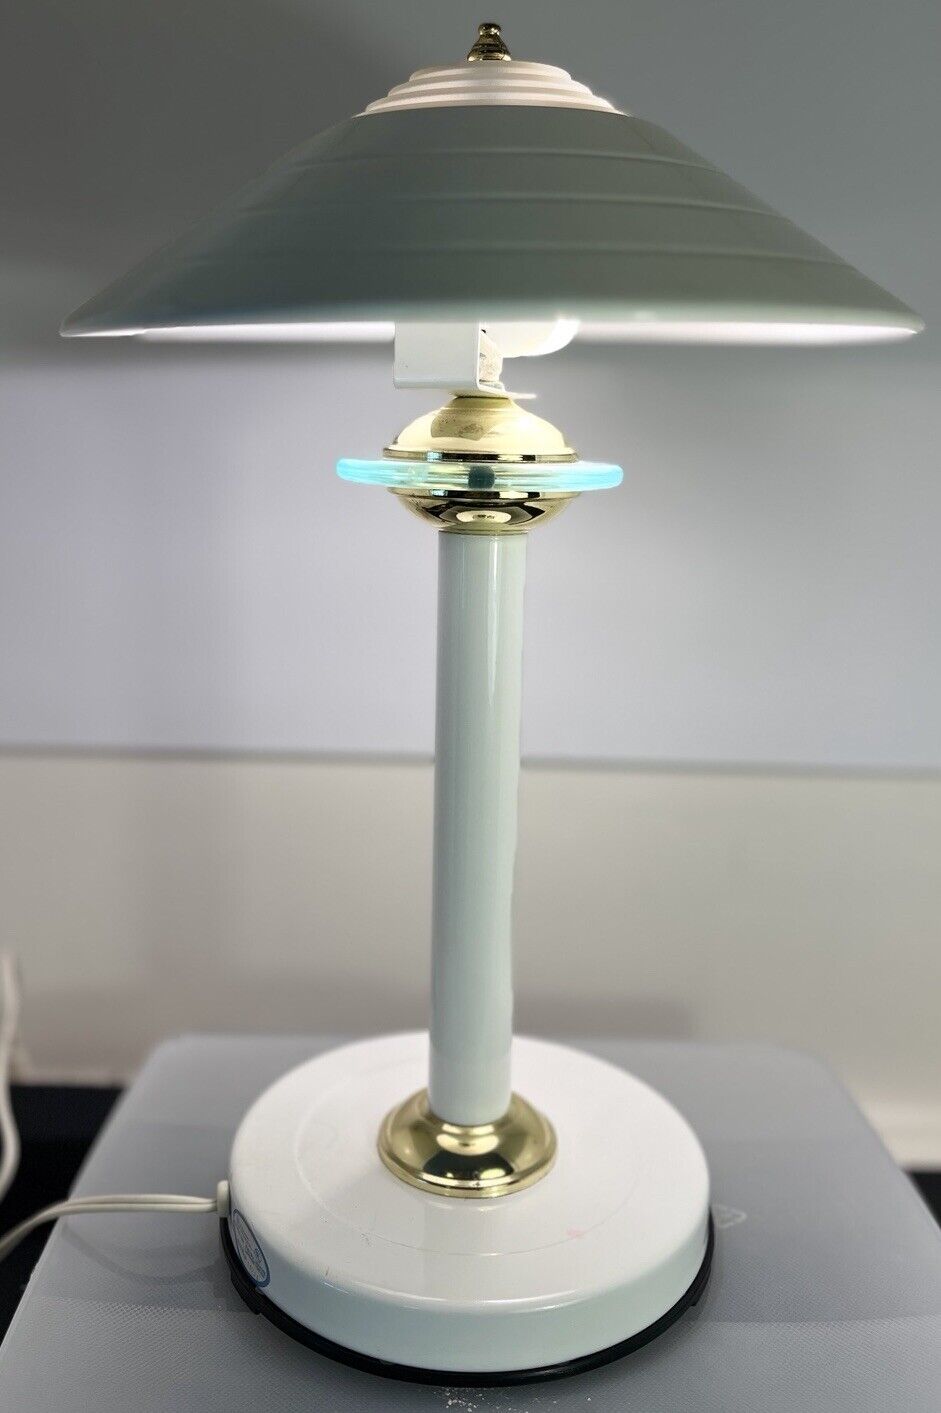 VTG 80s Table Lamp Metal Retro Mushroom Dome Atomic Flying Saucer UFO Switch On